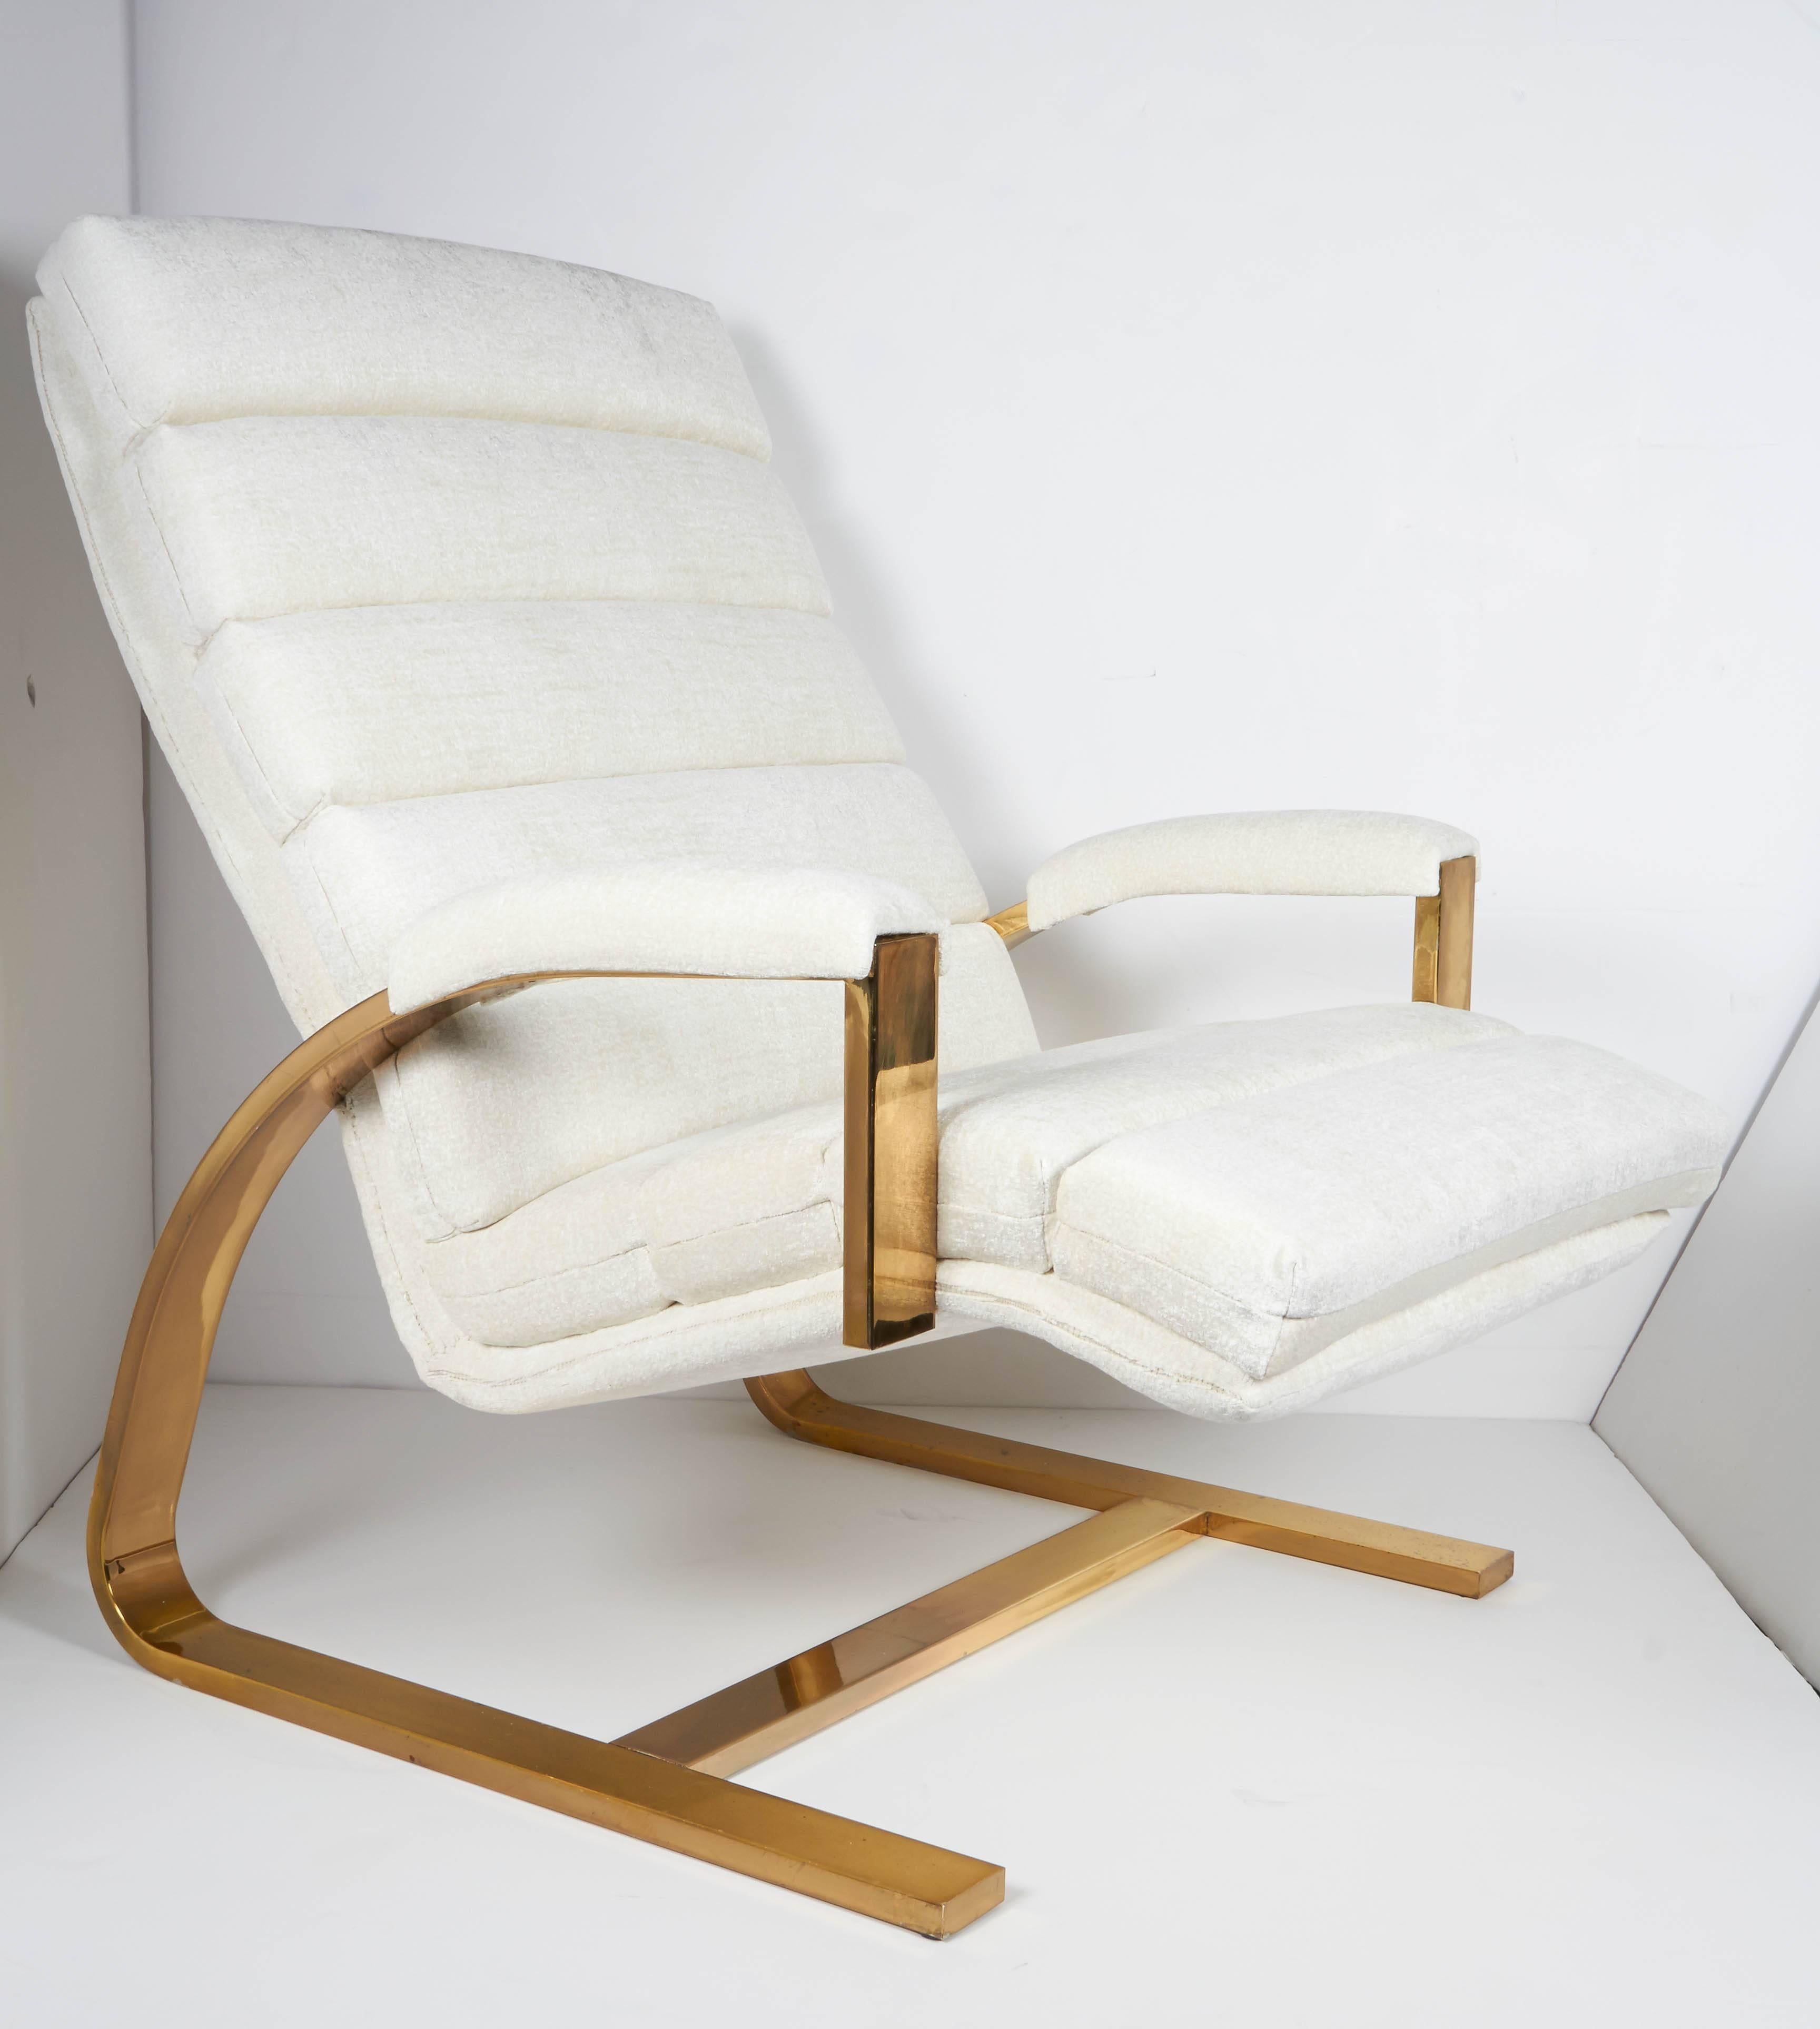 Pair of sexy lounge chairs with ultra modernist profiles. The chairs feature unique cantilevered frames with arched designs in a highly polished brass. Newly upholstered in a nubby crème chenille, featuring mod channel tufting along back and seat,